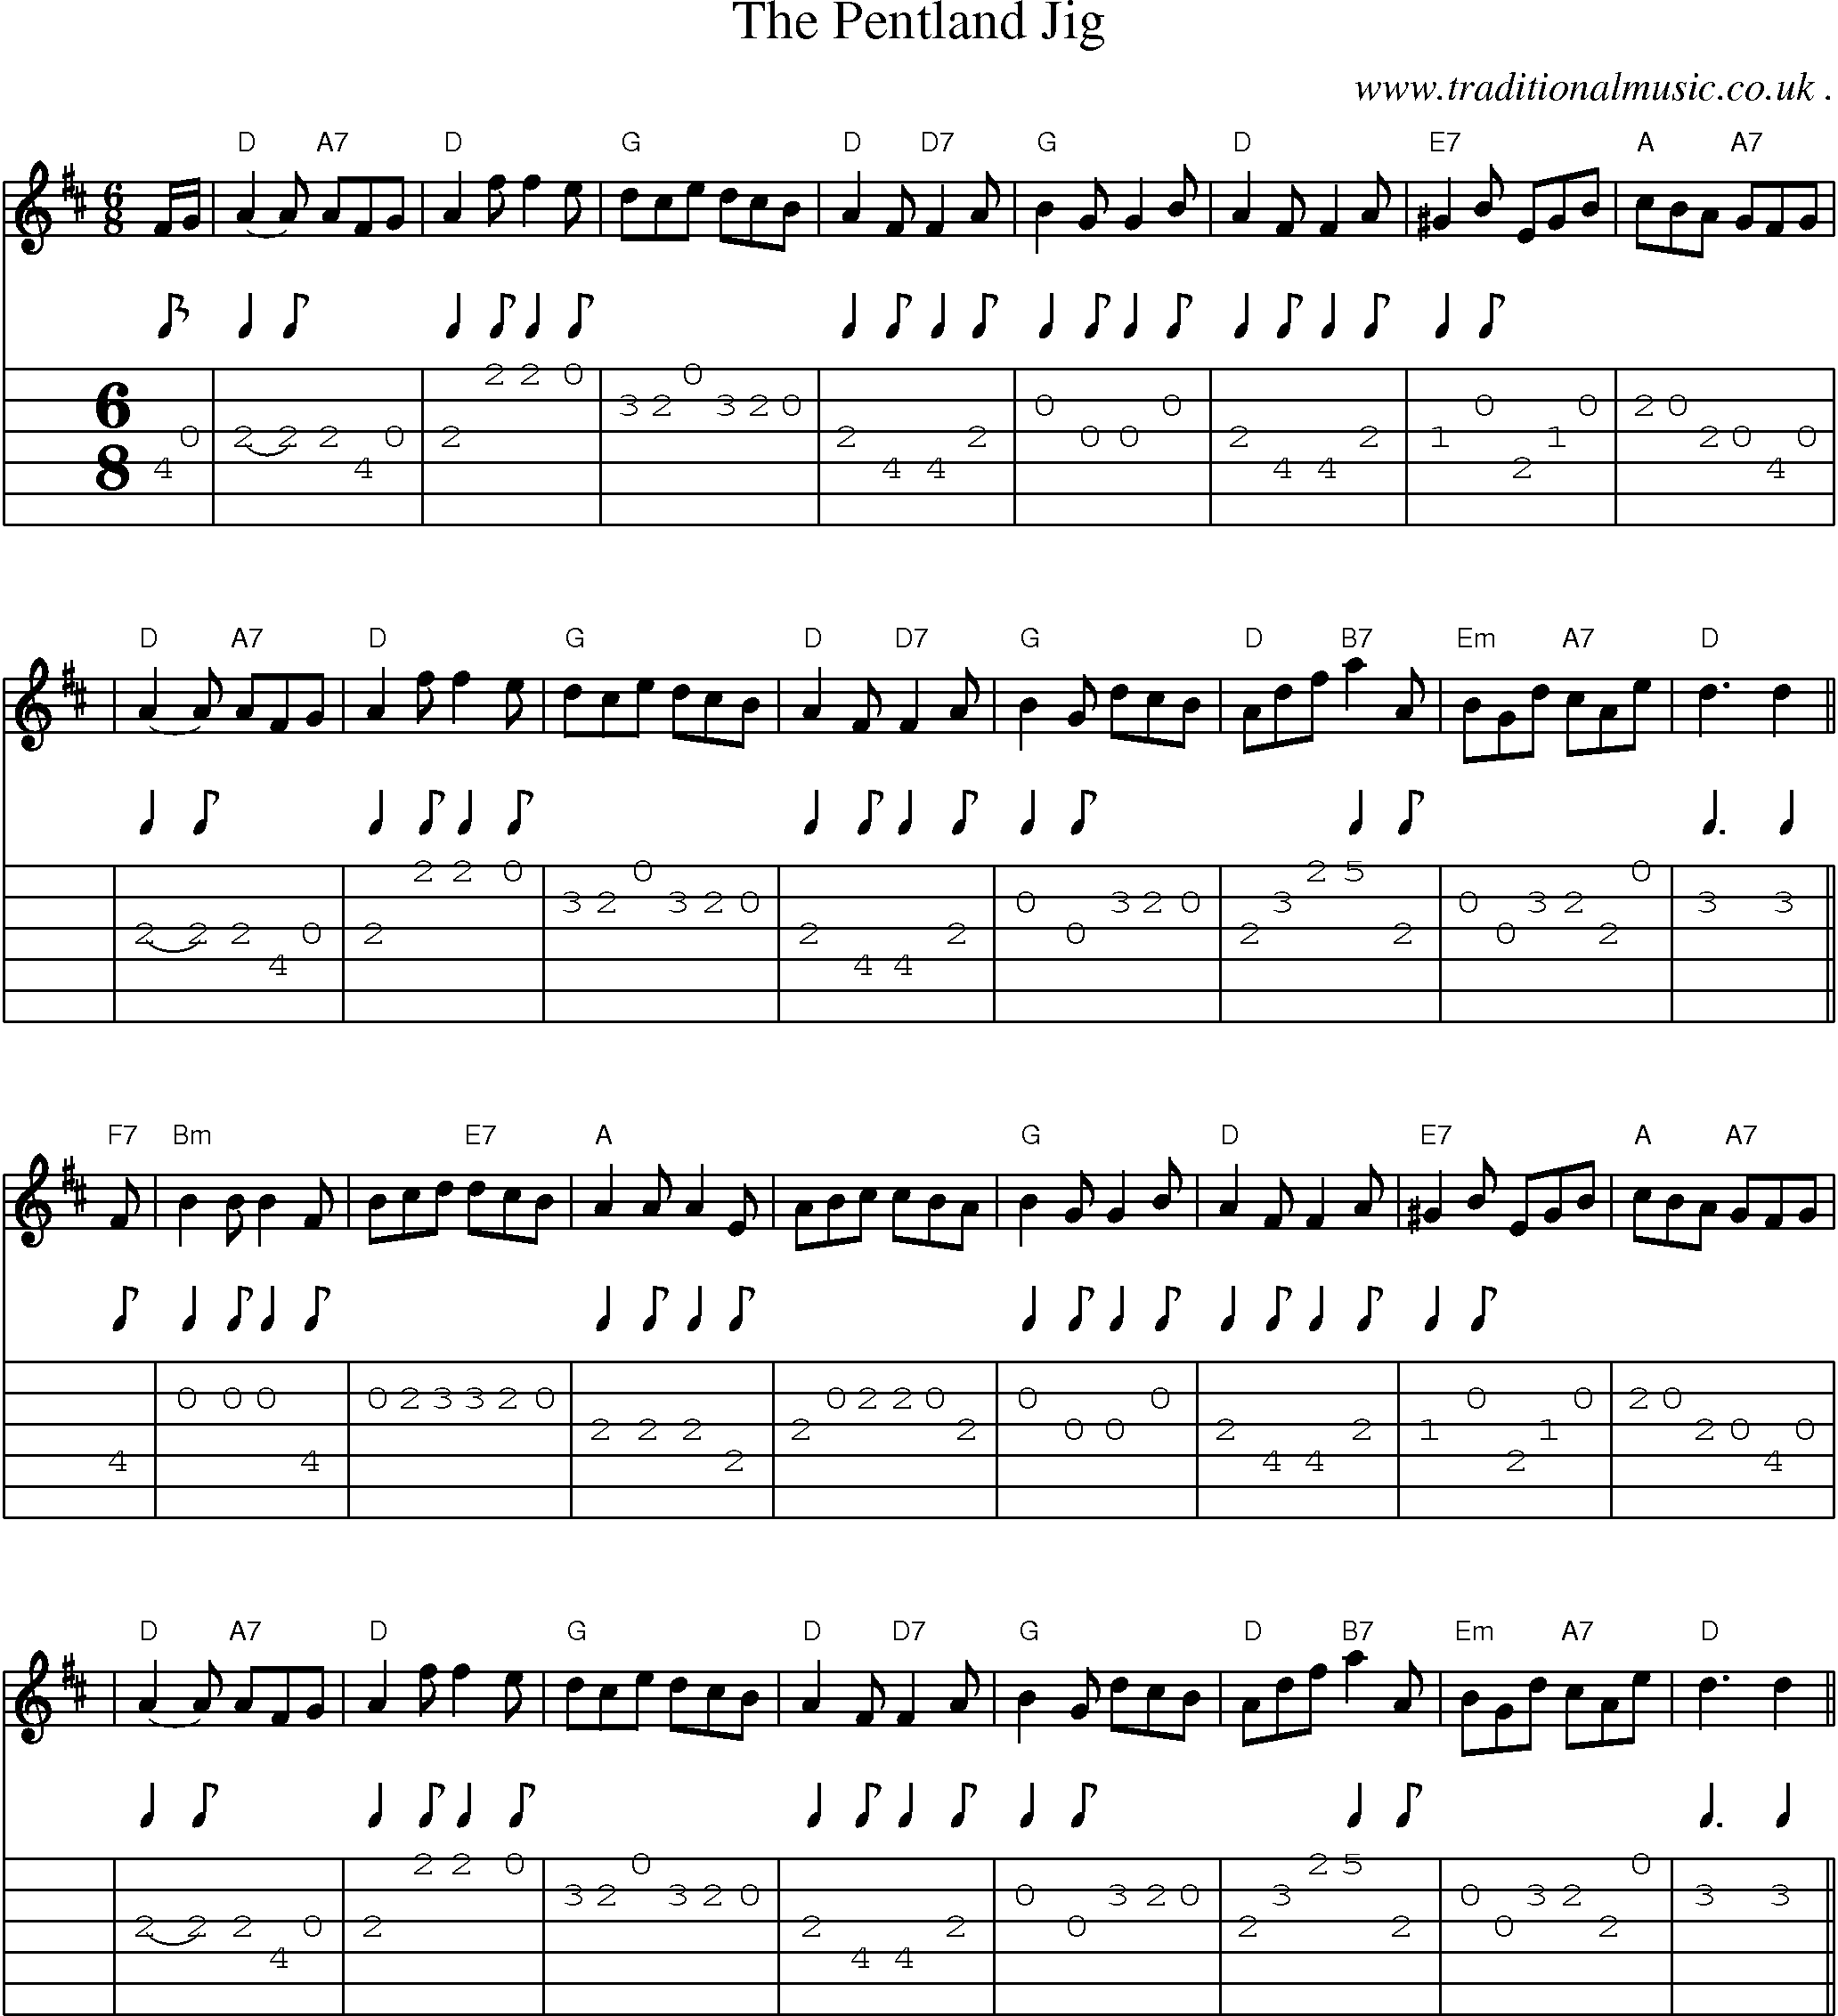 Sheet-music  score, Chords and Guitar Tabs for The Pentland Jig